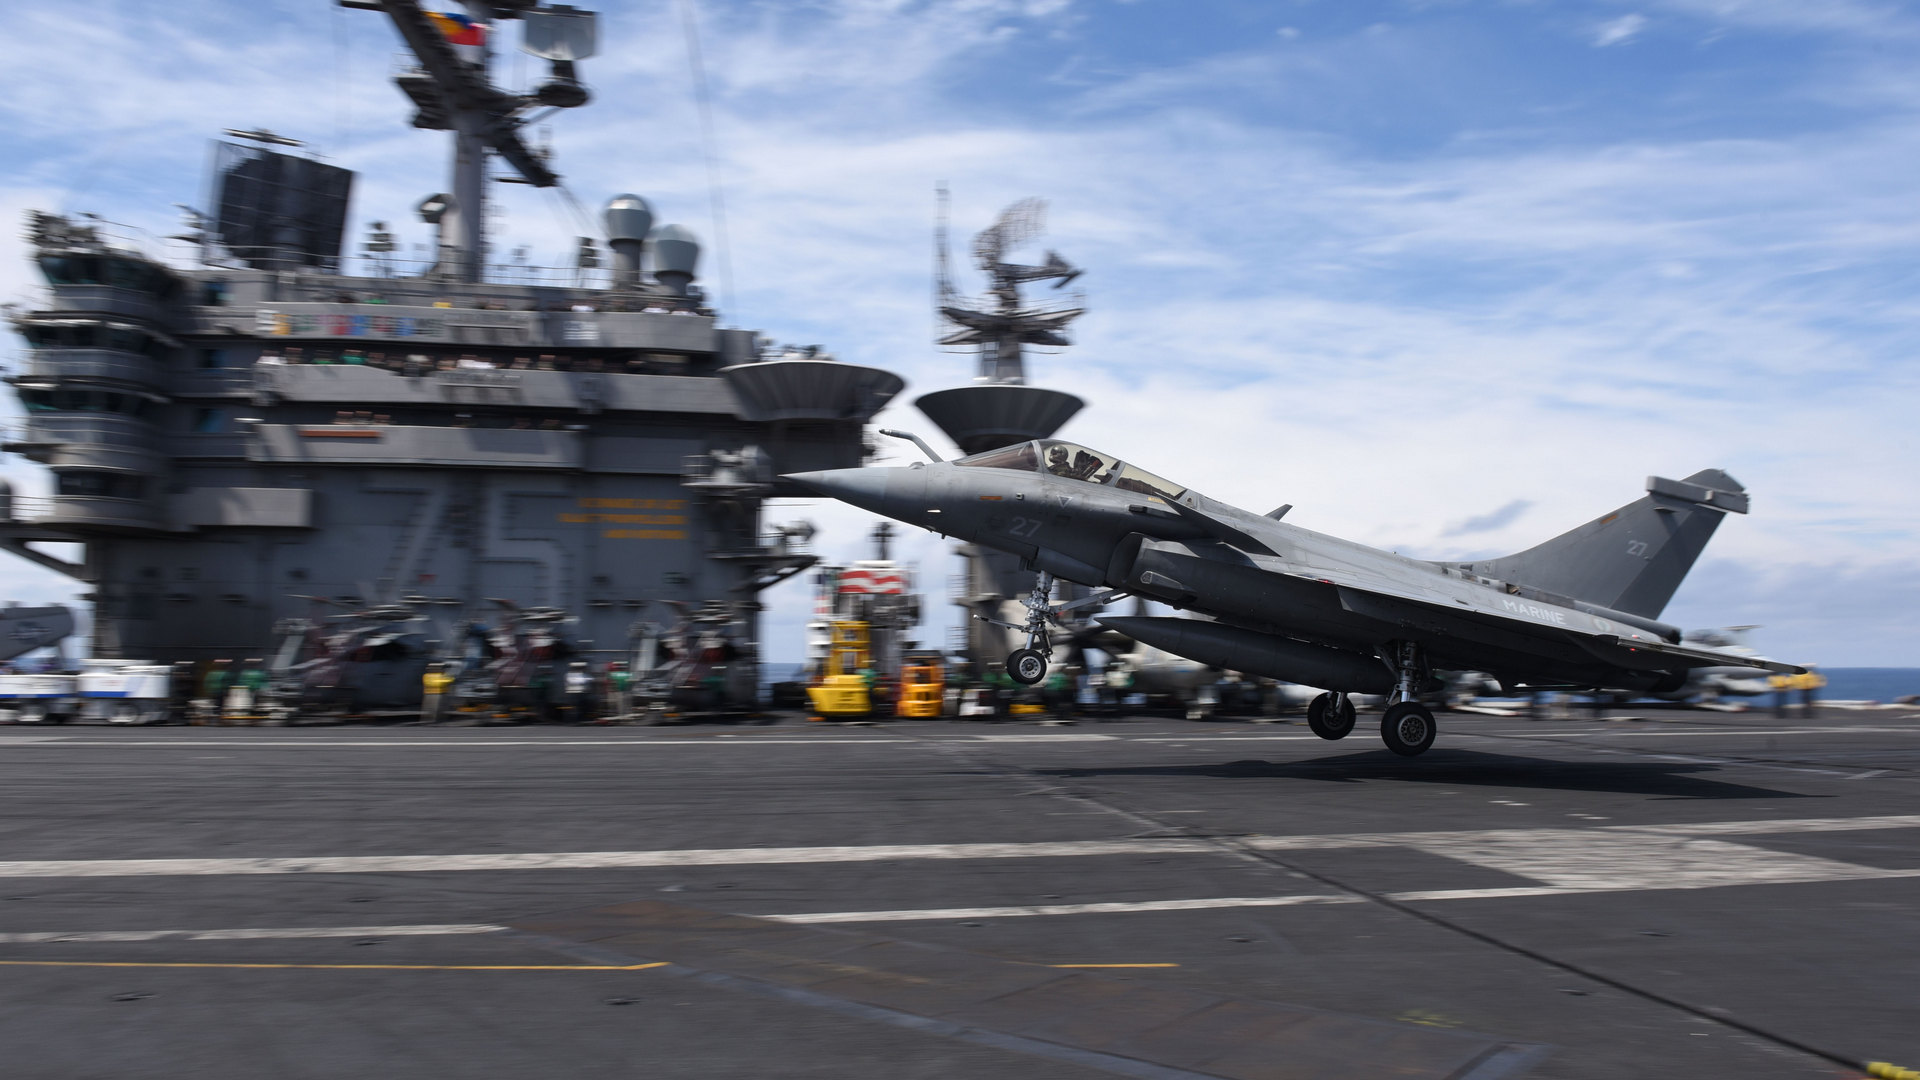 Atlantic Ocean (July 3, 2018) A French Dassault Rafale M Fighter lands on the flight deck of the Nimitz-class aircraft carrier USS Harry S. Truman (CVN 75). Harry S. Truman is deployed as part of an ongoing rotation of U.S. forces supporting maritime security operations in international waters around the globe. (U.S. Navy photo by Mass Communication Specialist 2nd Class Thomas Goole. -